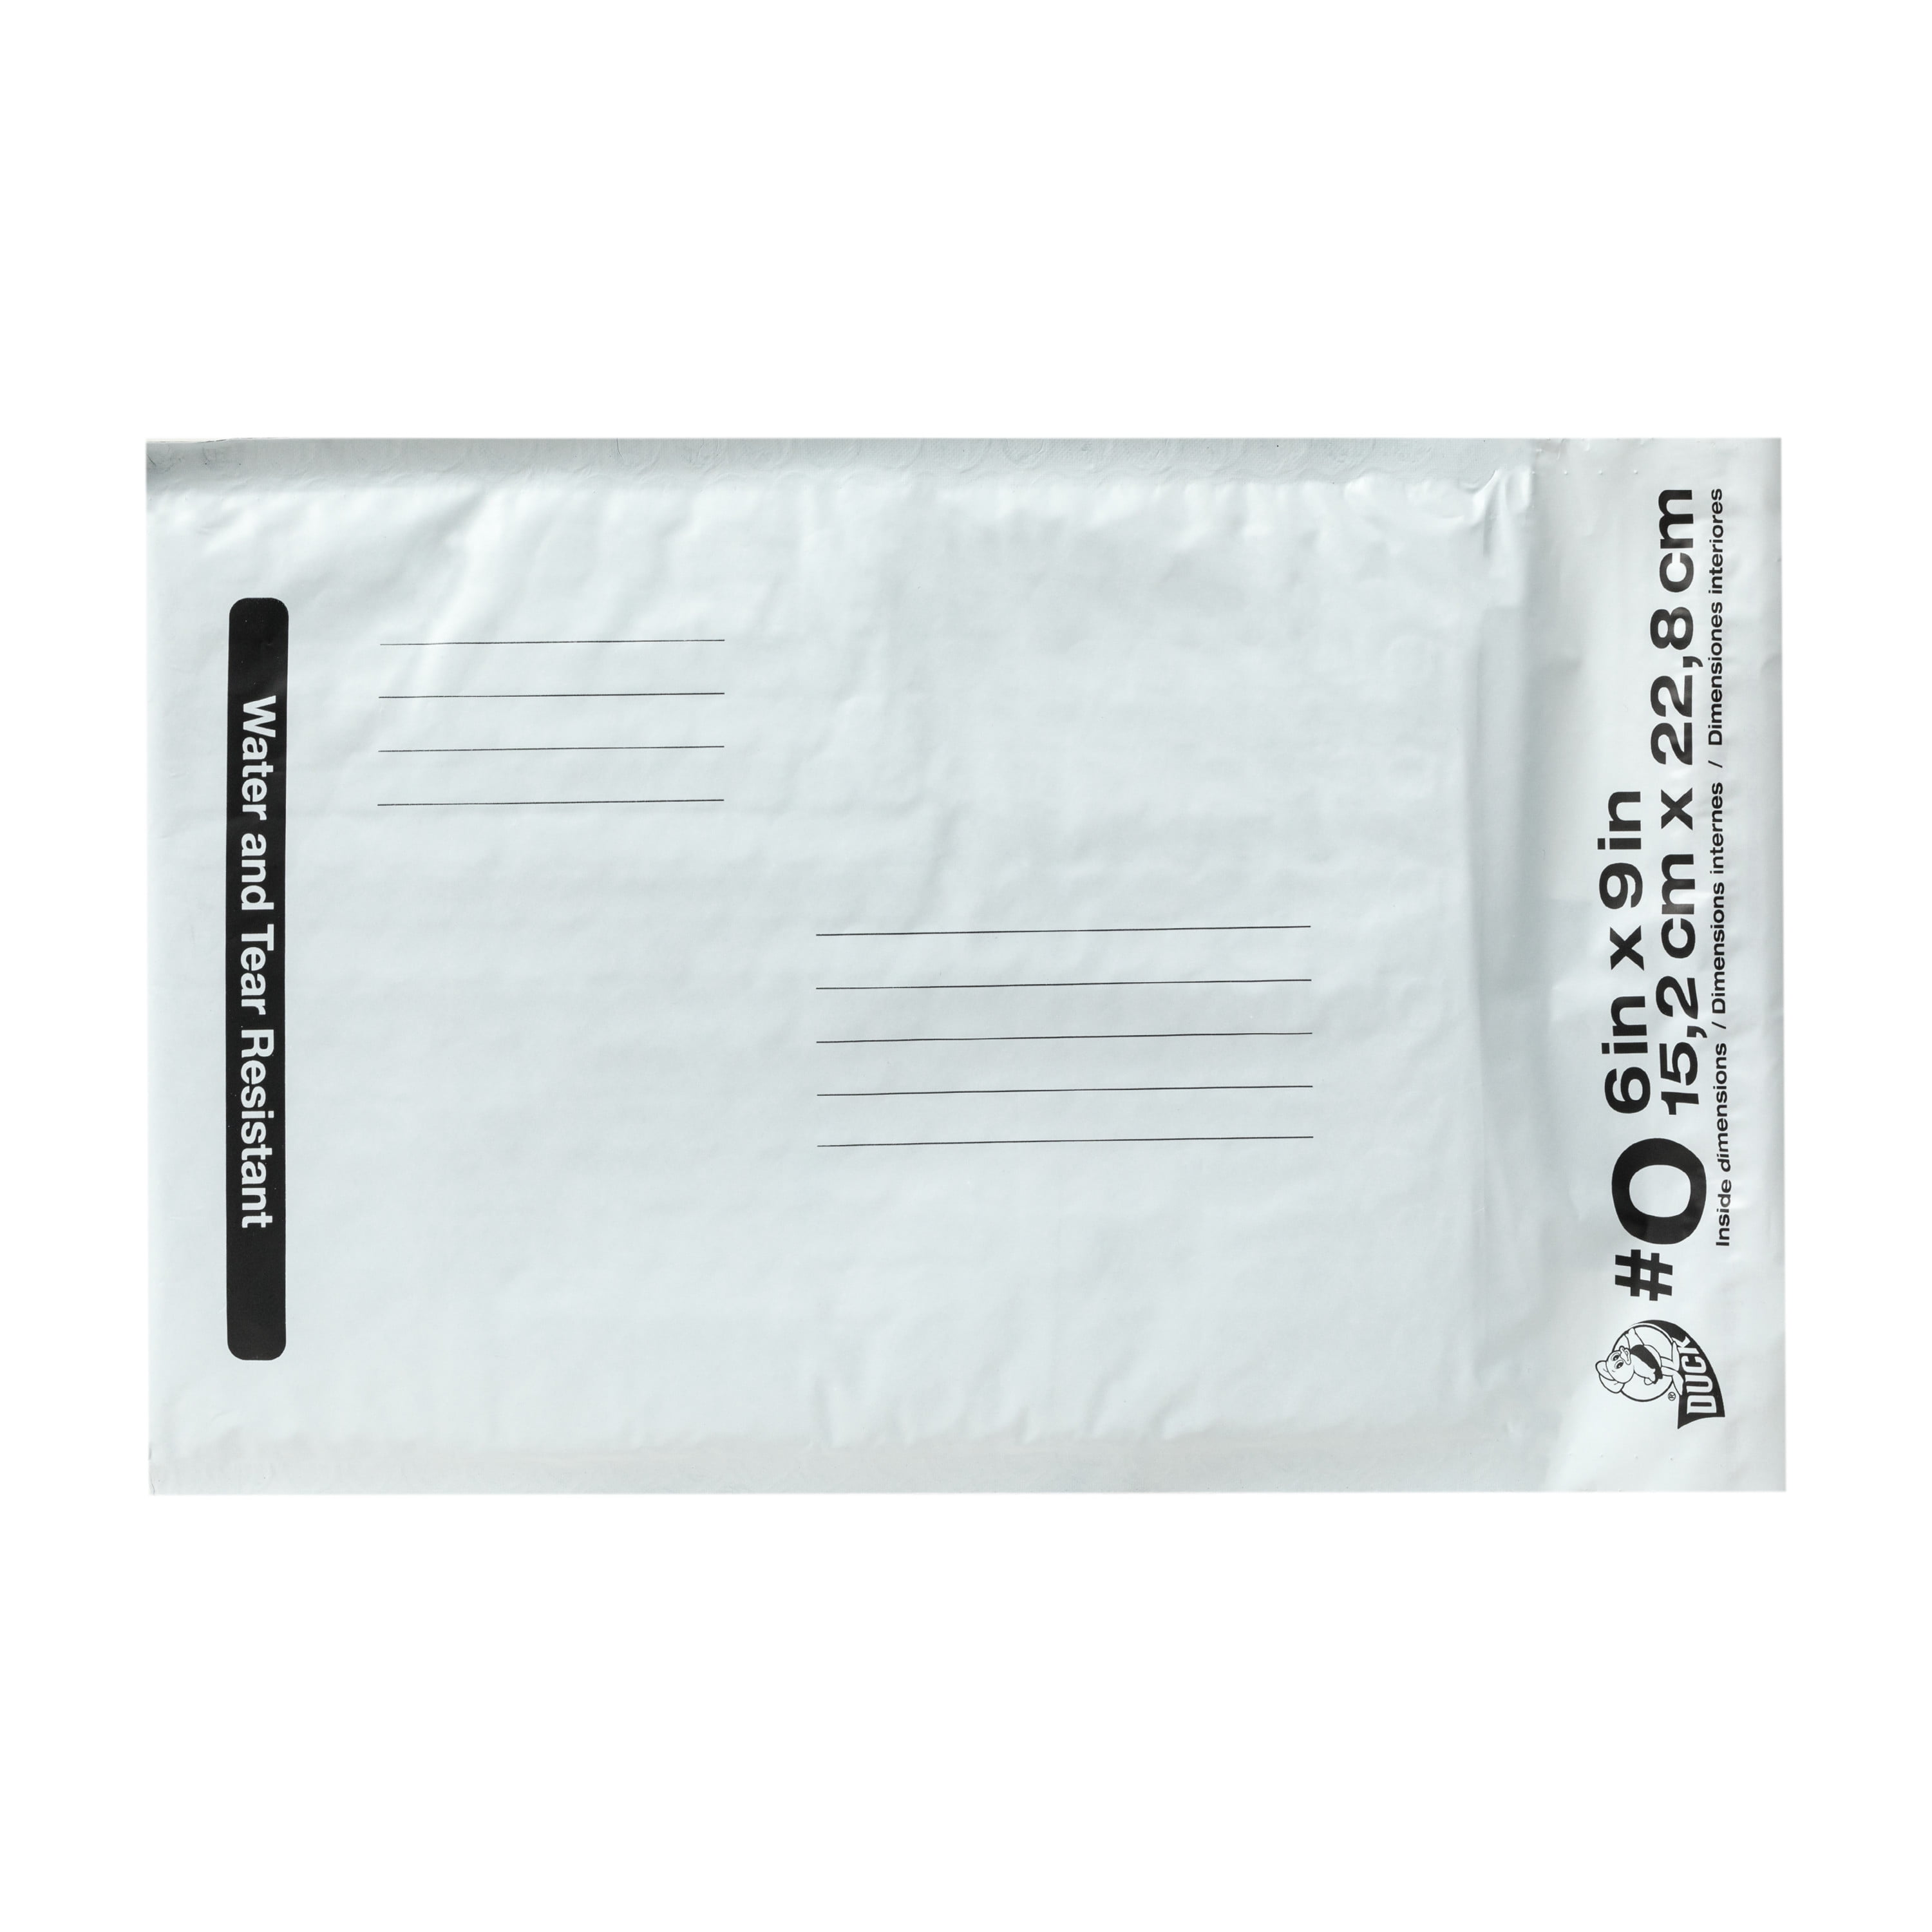 Beauticom 6 x 9 #0 Lightweight Self-Sealing Padded Bubble Mailer Envelopes  for Mailing and Shipping (White, 20pcs) 